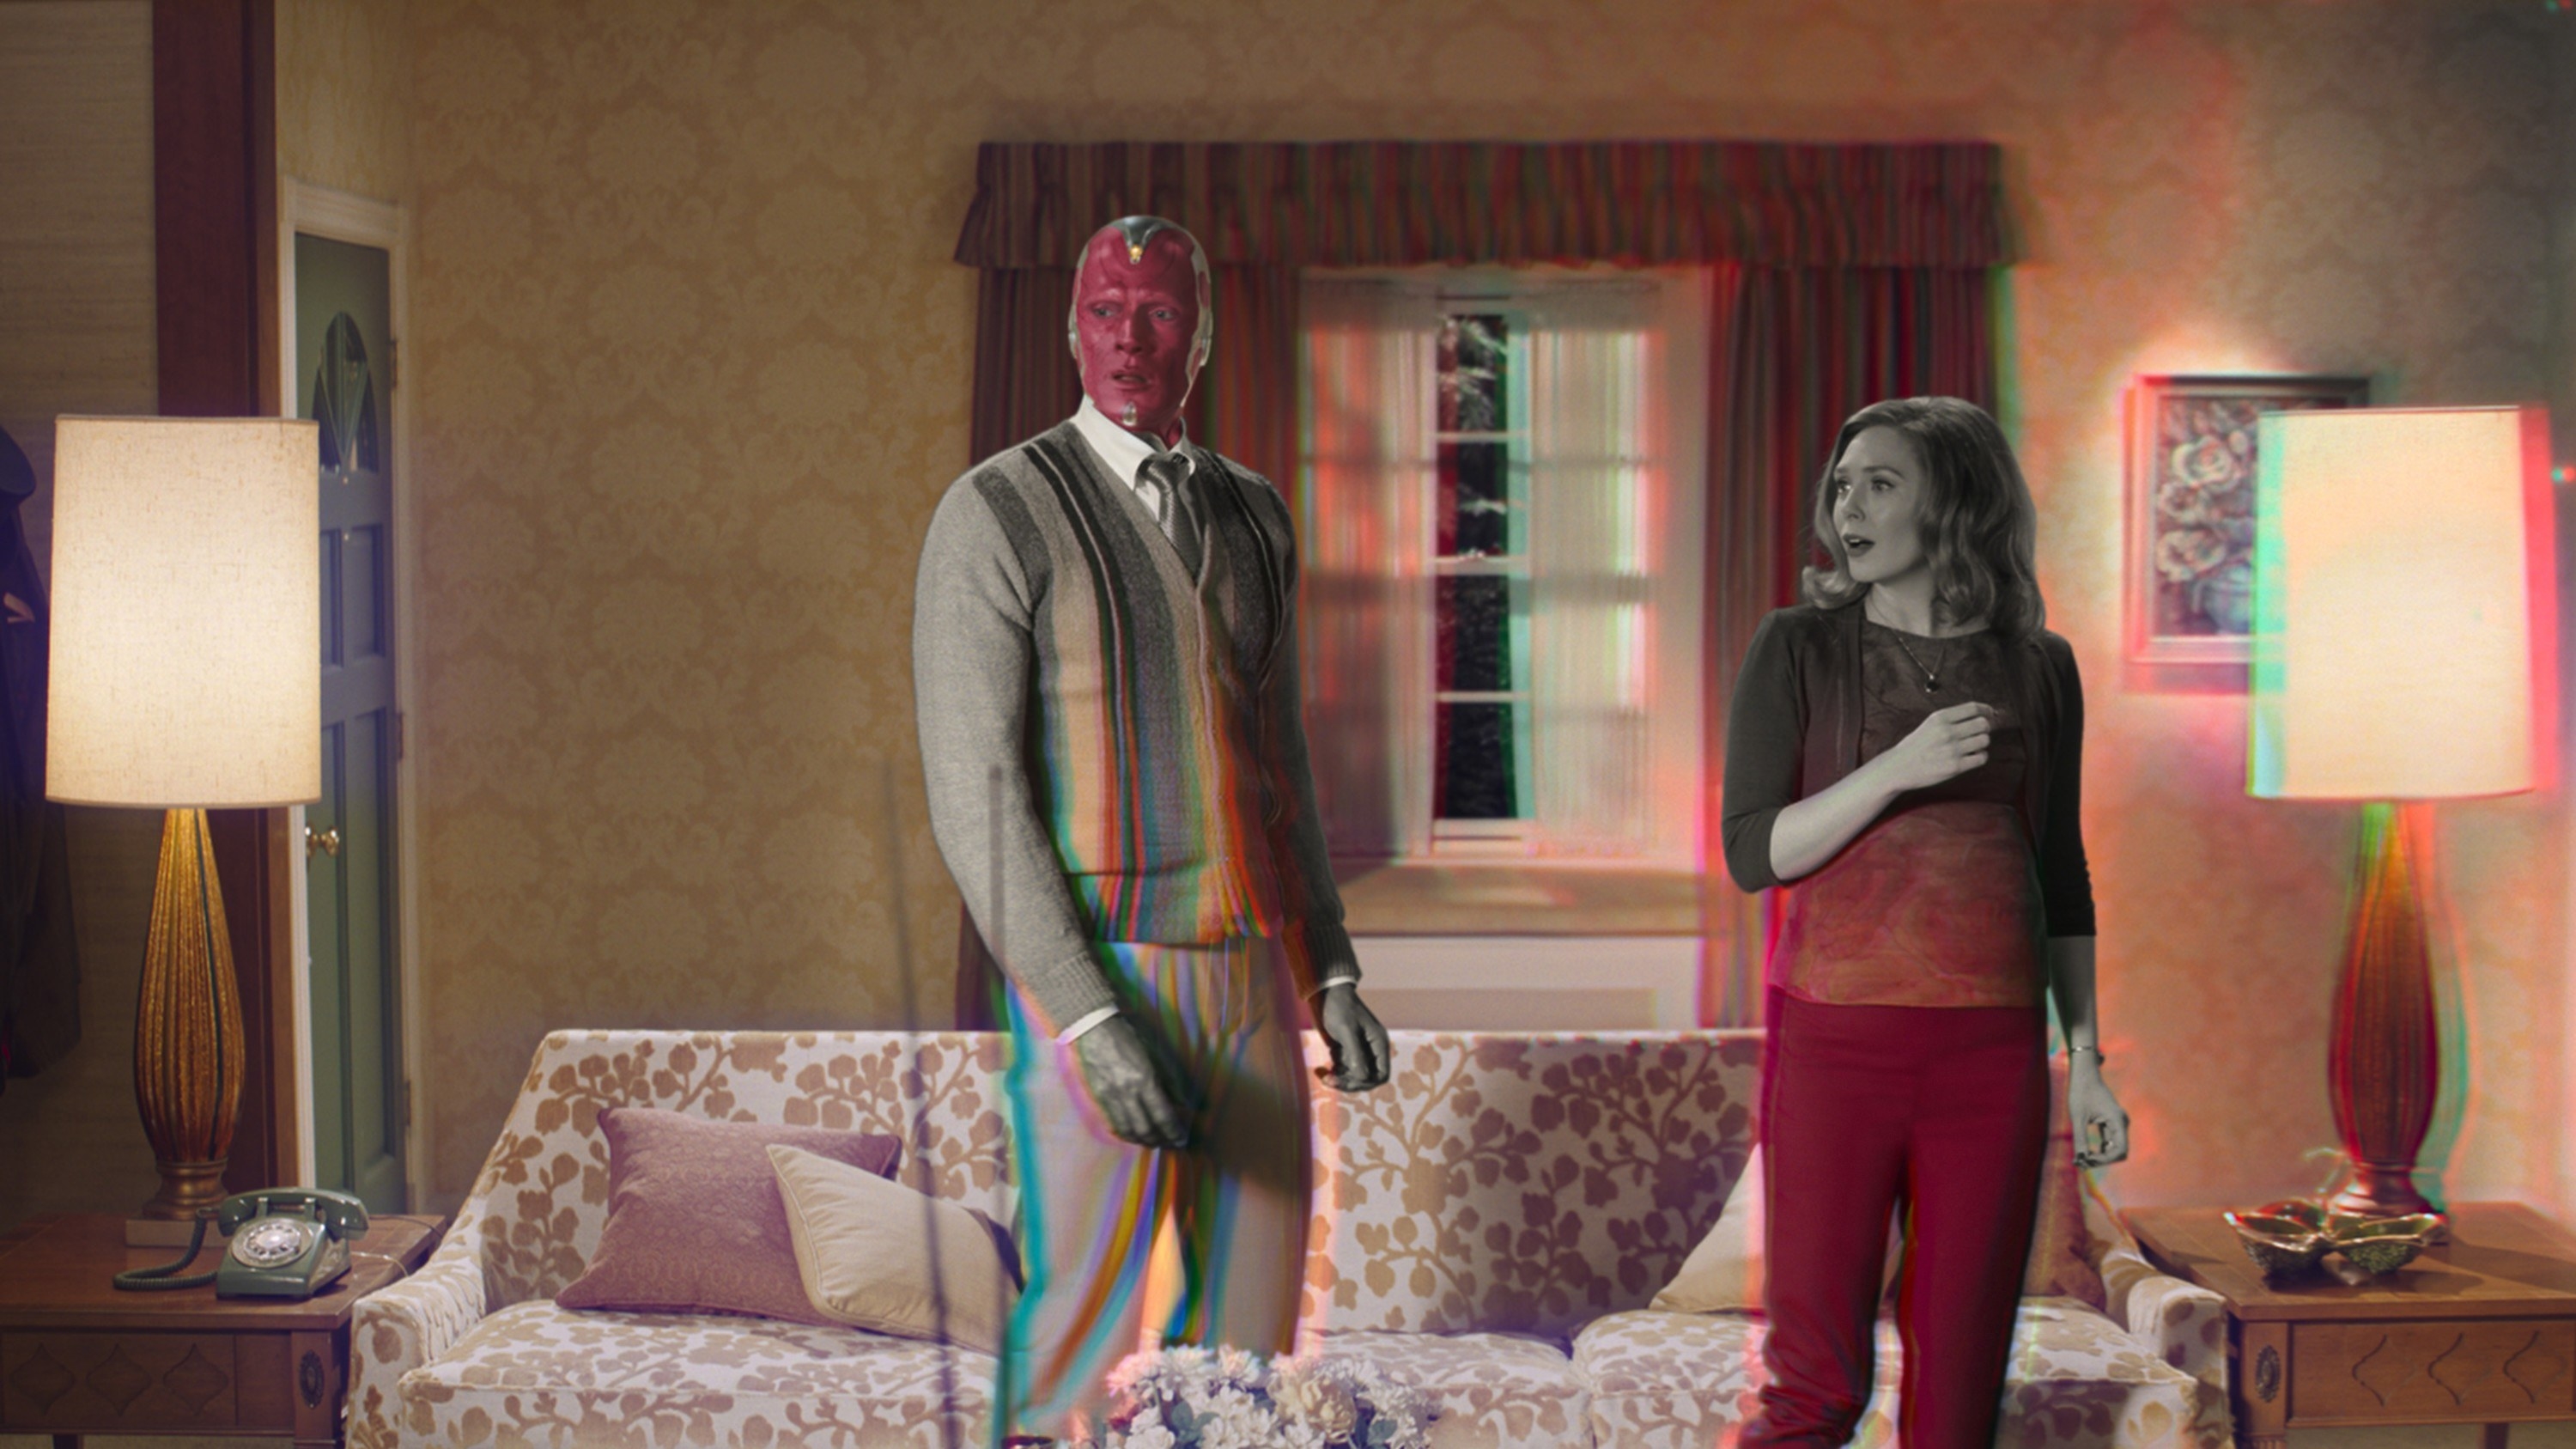 Vision and Wanda in a home fading from black and white into color